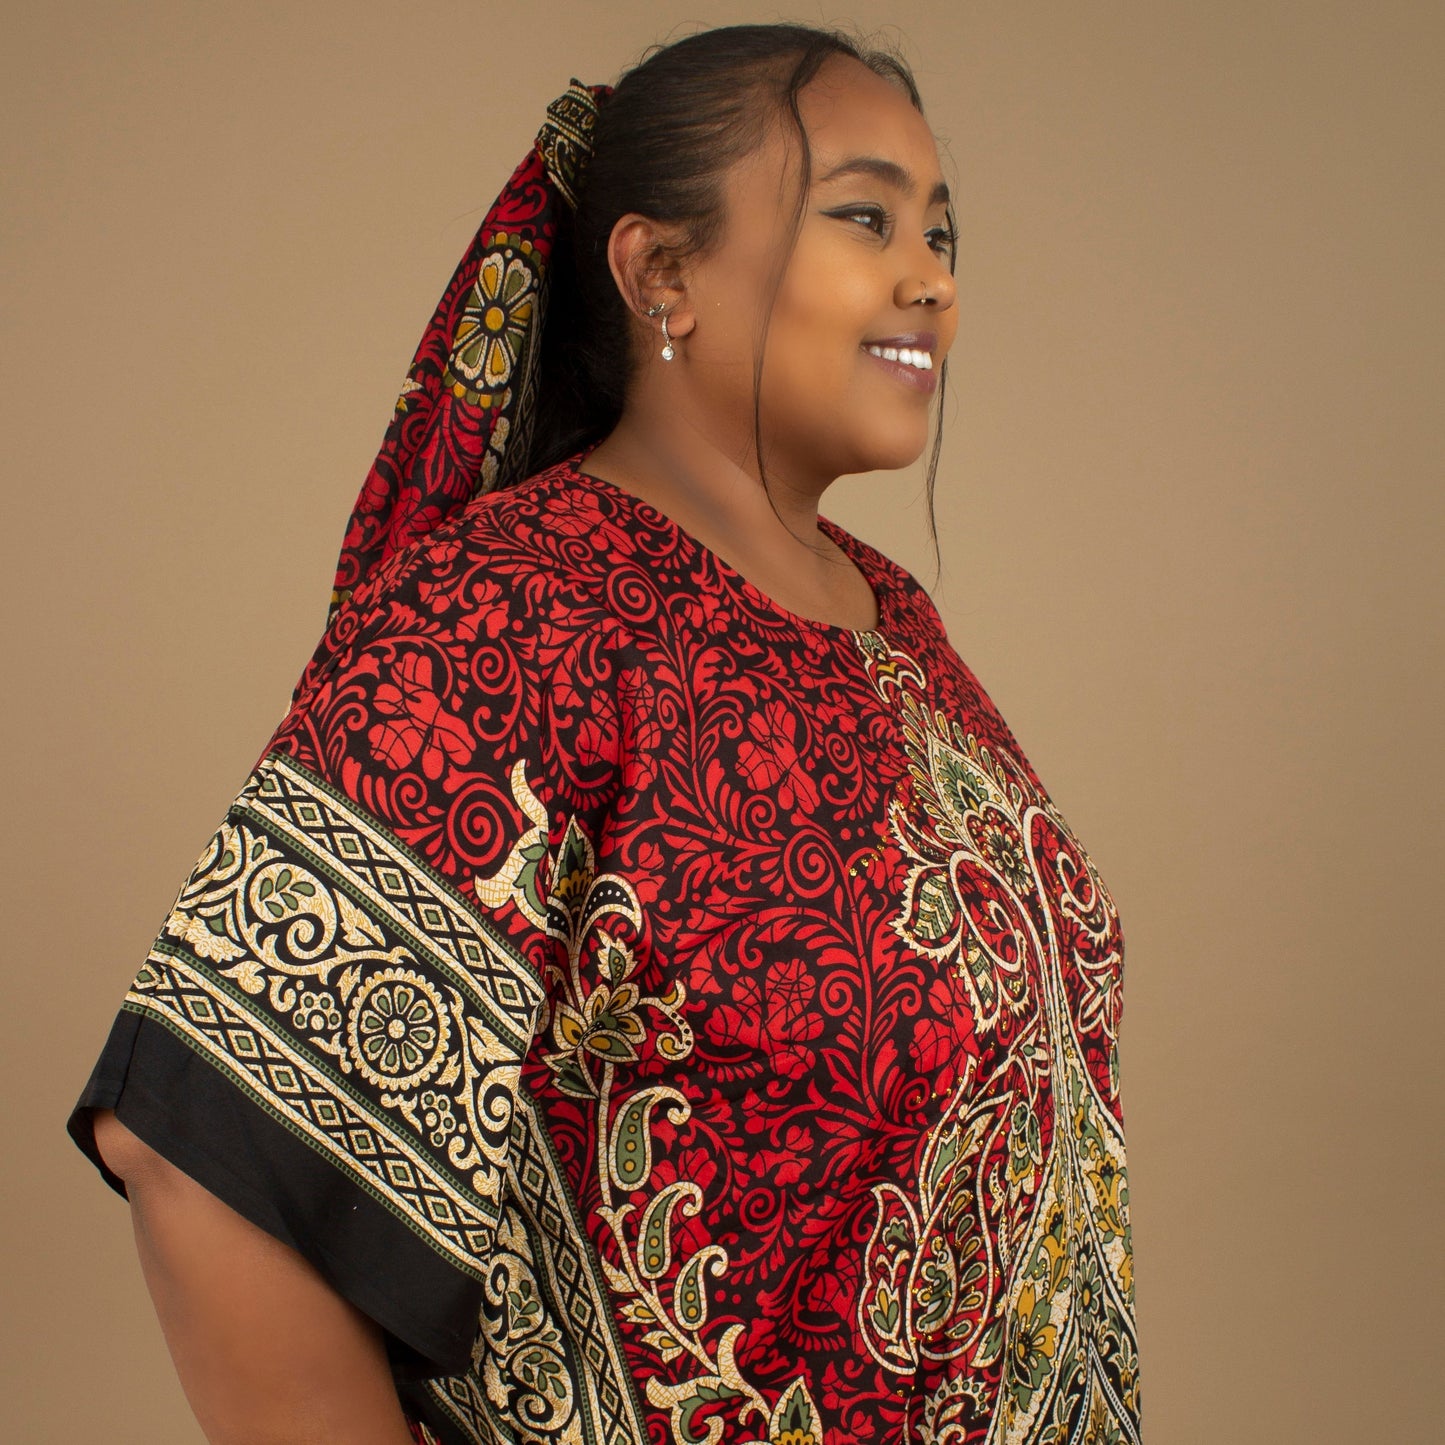 The Dashiki Floor Length Kaftan Dress in a lightweight Chiffon Fabric in a gorgeous rich red, white, black and gold floral mandala African Print pattern. Designed in England Made in Nigeria. 